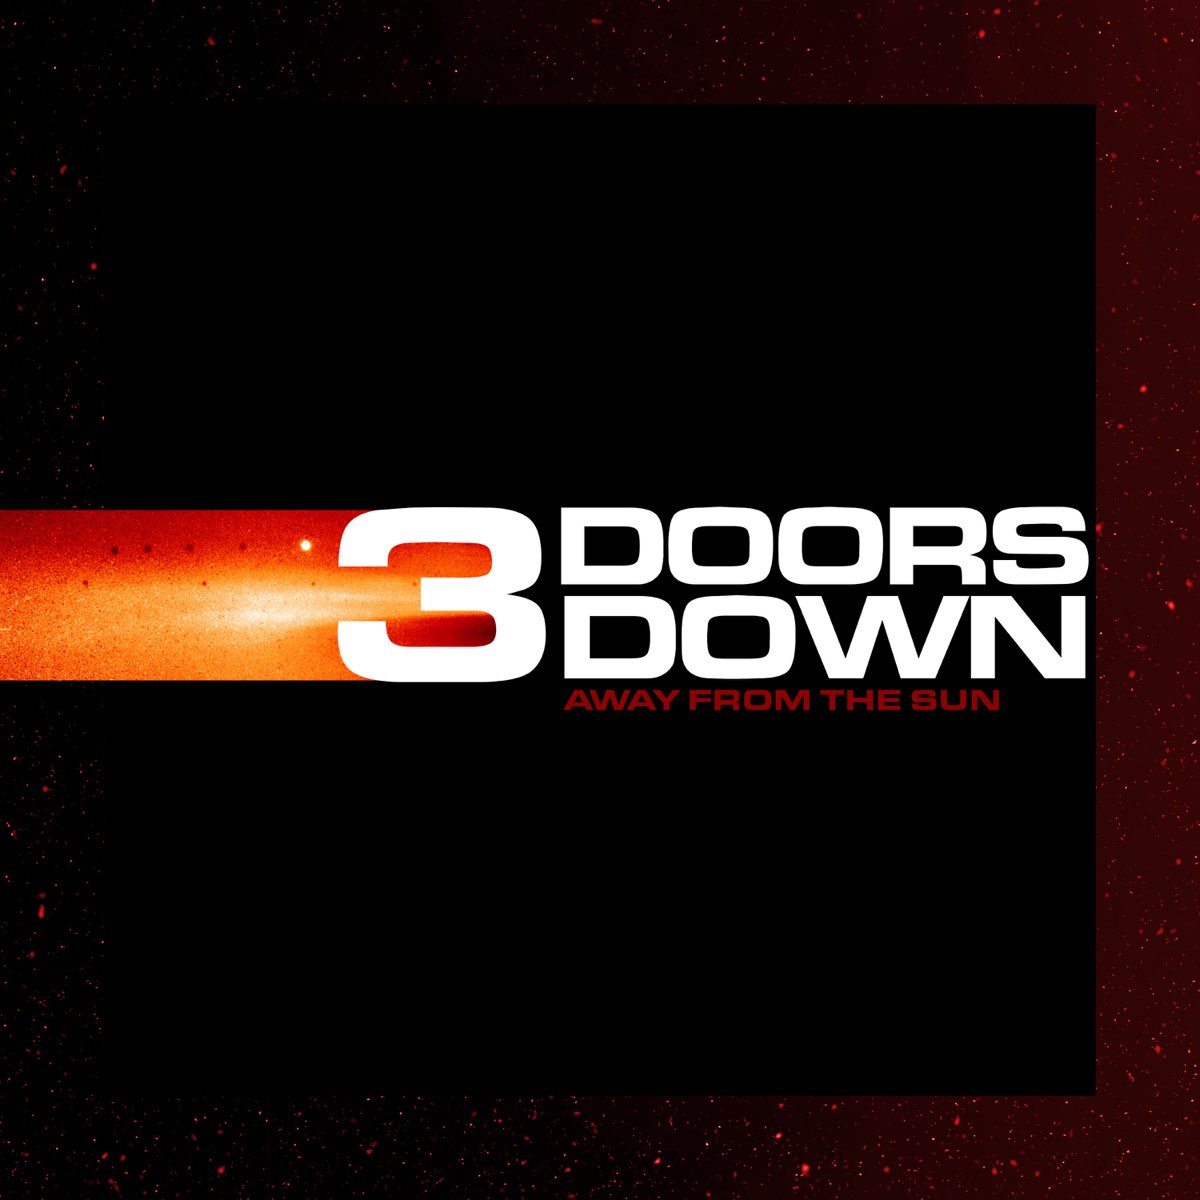 ‎Away From The Sun (Deluxe) - Album by 3 Doors Down - Apple Music